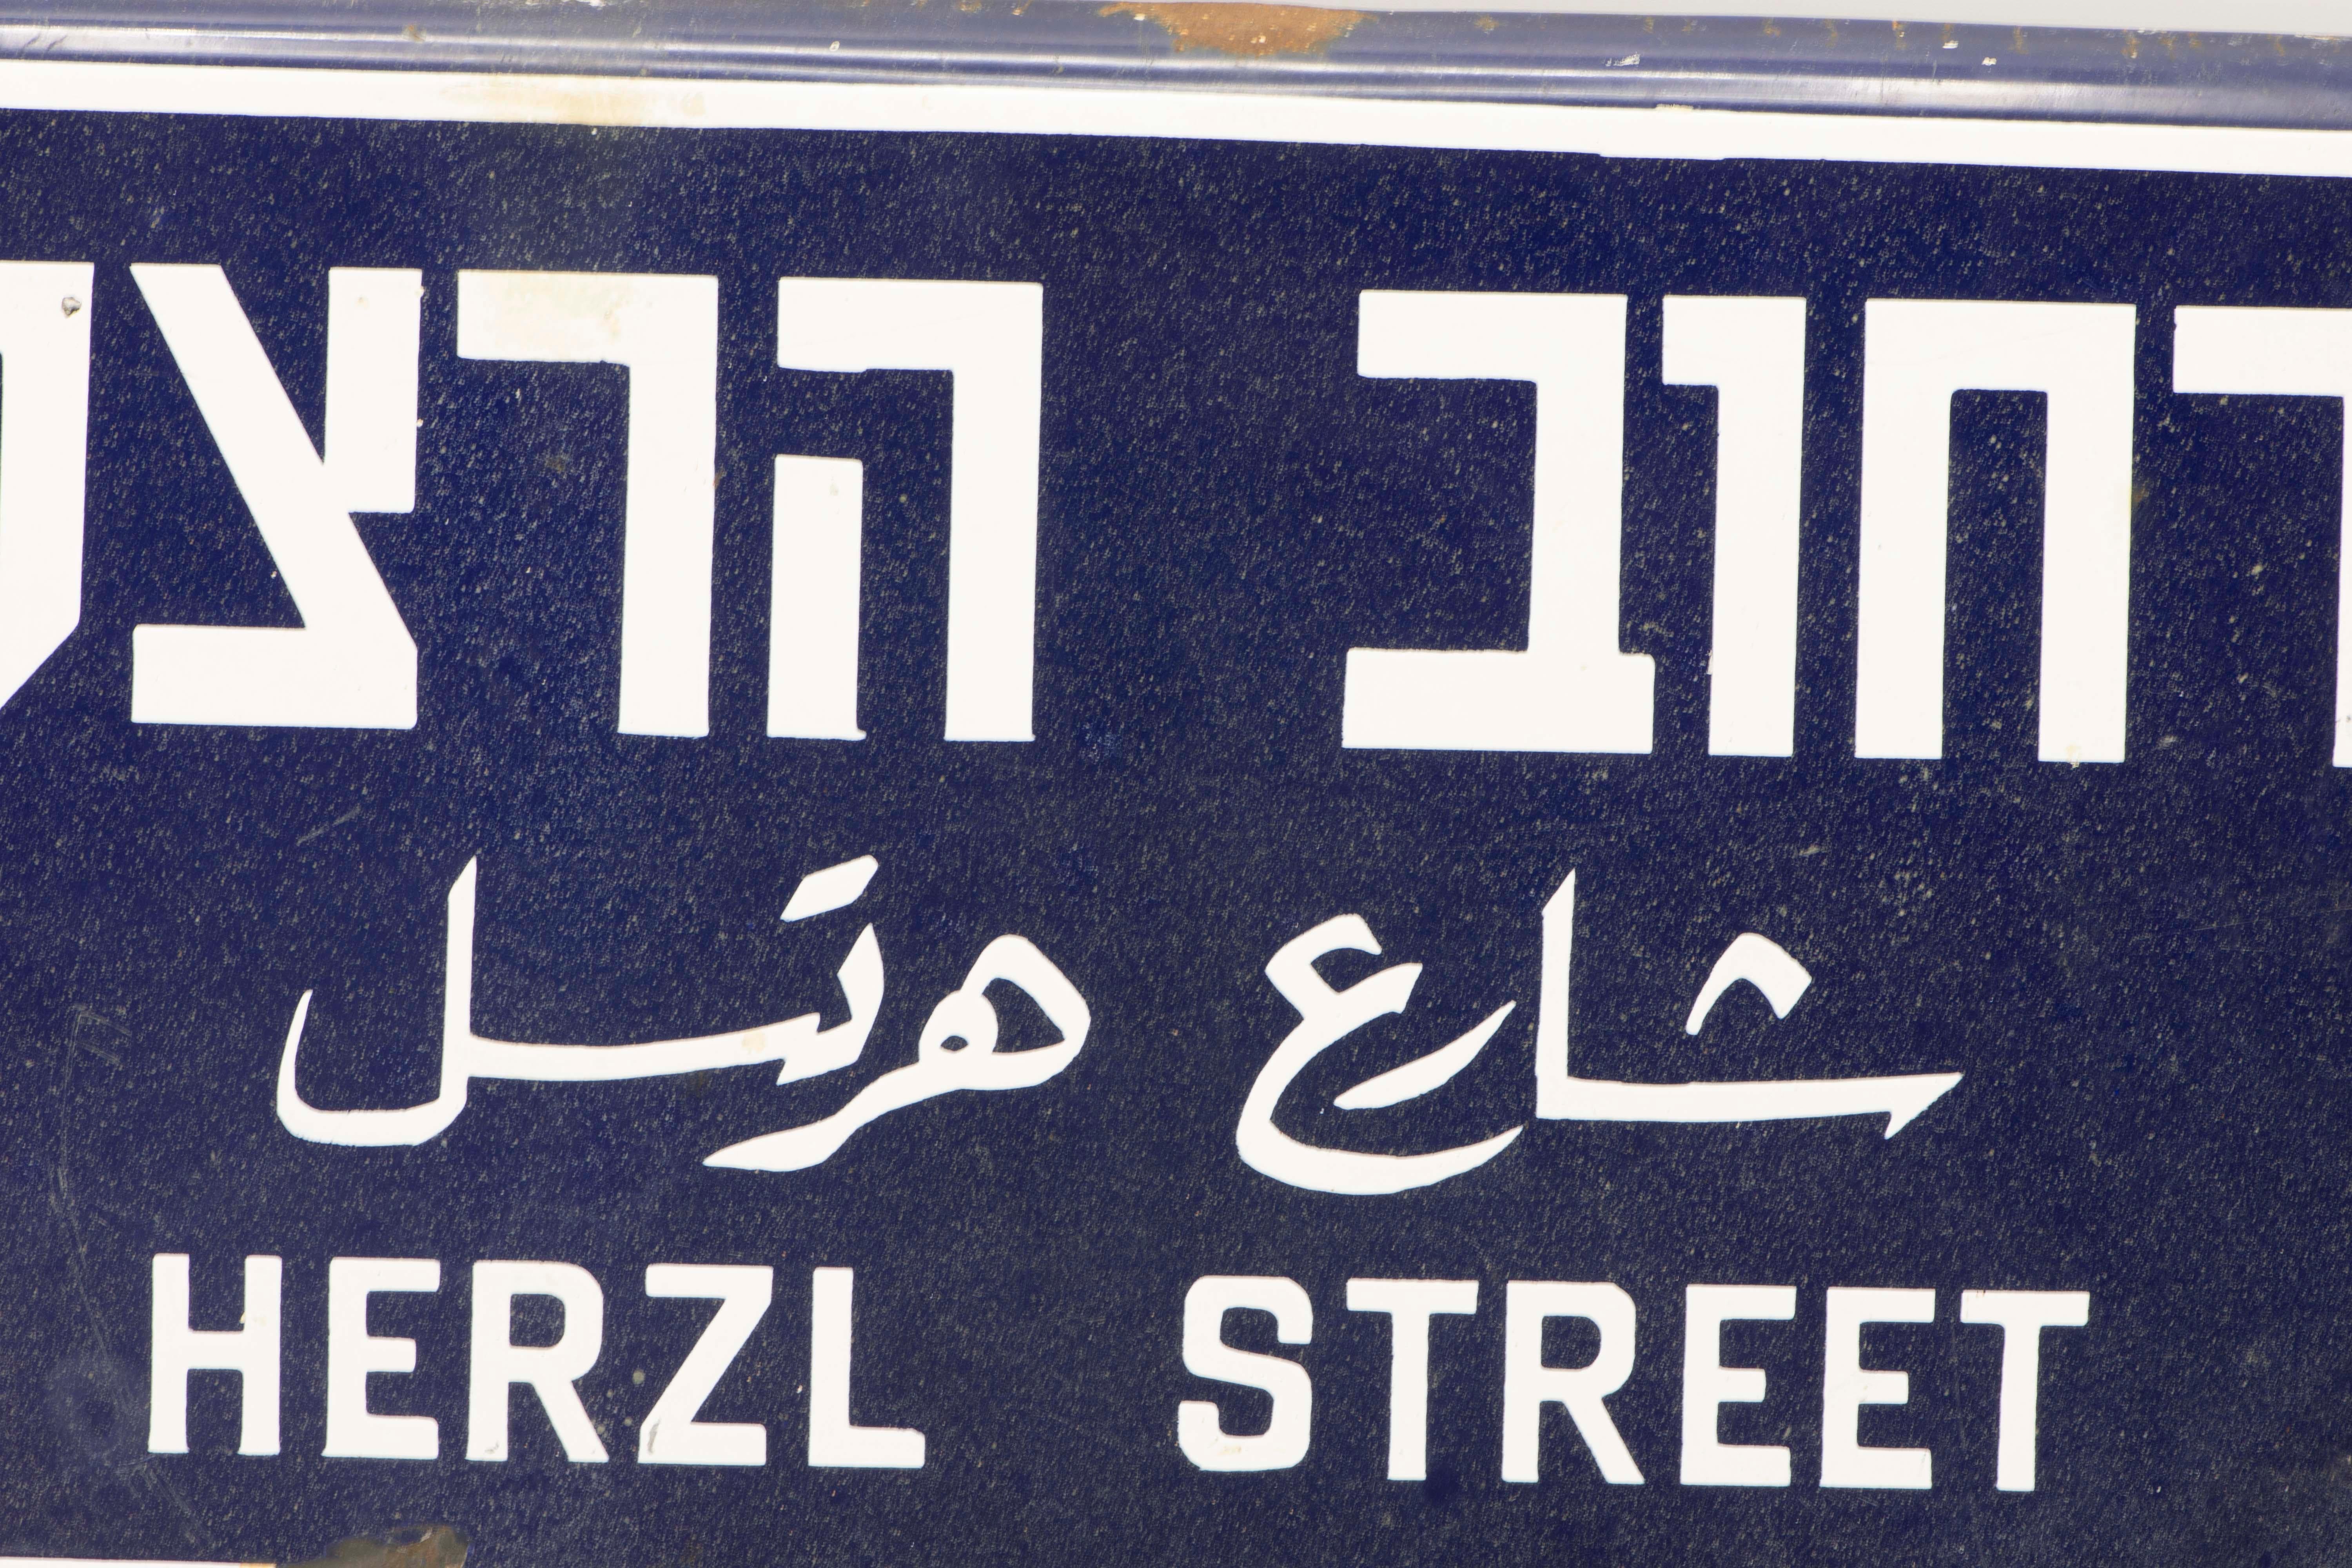 Three languages iron and enamel street sign, circa 1920.
The sign was made to Honor Theodor Herzl who was an Austro-Hungarian Jewish journalist, playwright, political activist, and writer who was the father of modern political Zionism. Herzl formed